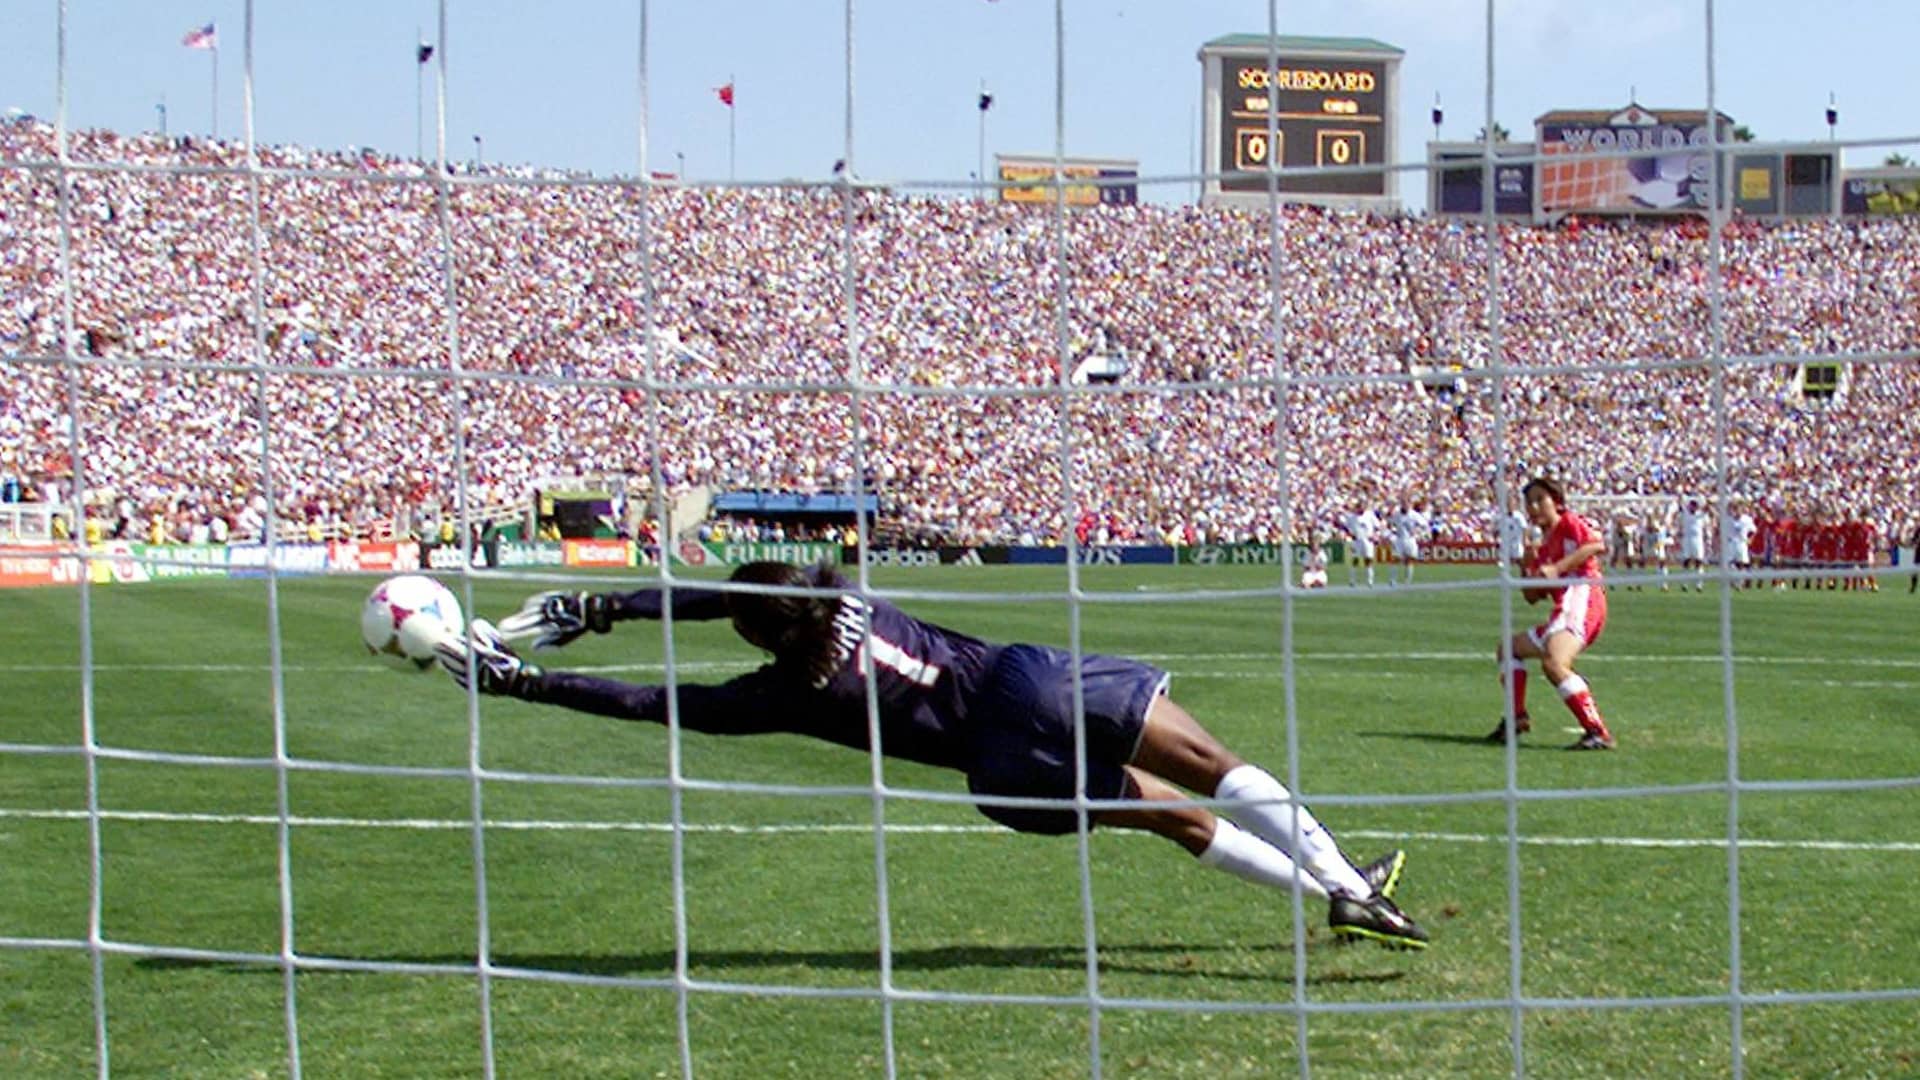 US goalkeeper Briana Scurry lunges as she stops the penalty kick by Liu Ying of the Chinese soccer team in a shoot-out at the end of their game in the finals of the Women's World Cup at the Rose Bowl in Pasadena, California 10 July 1999. The US team scored all of their five penalty shots to win the game.